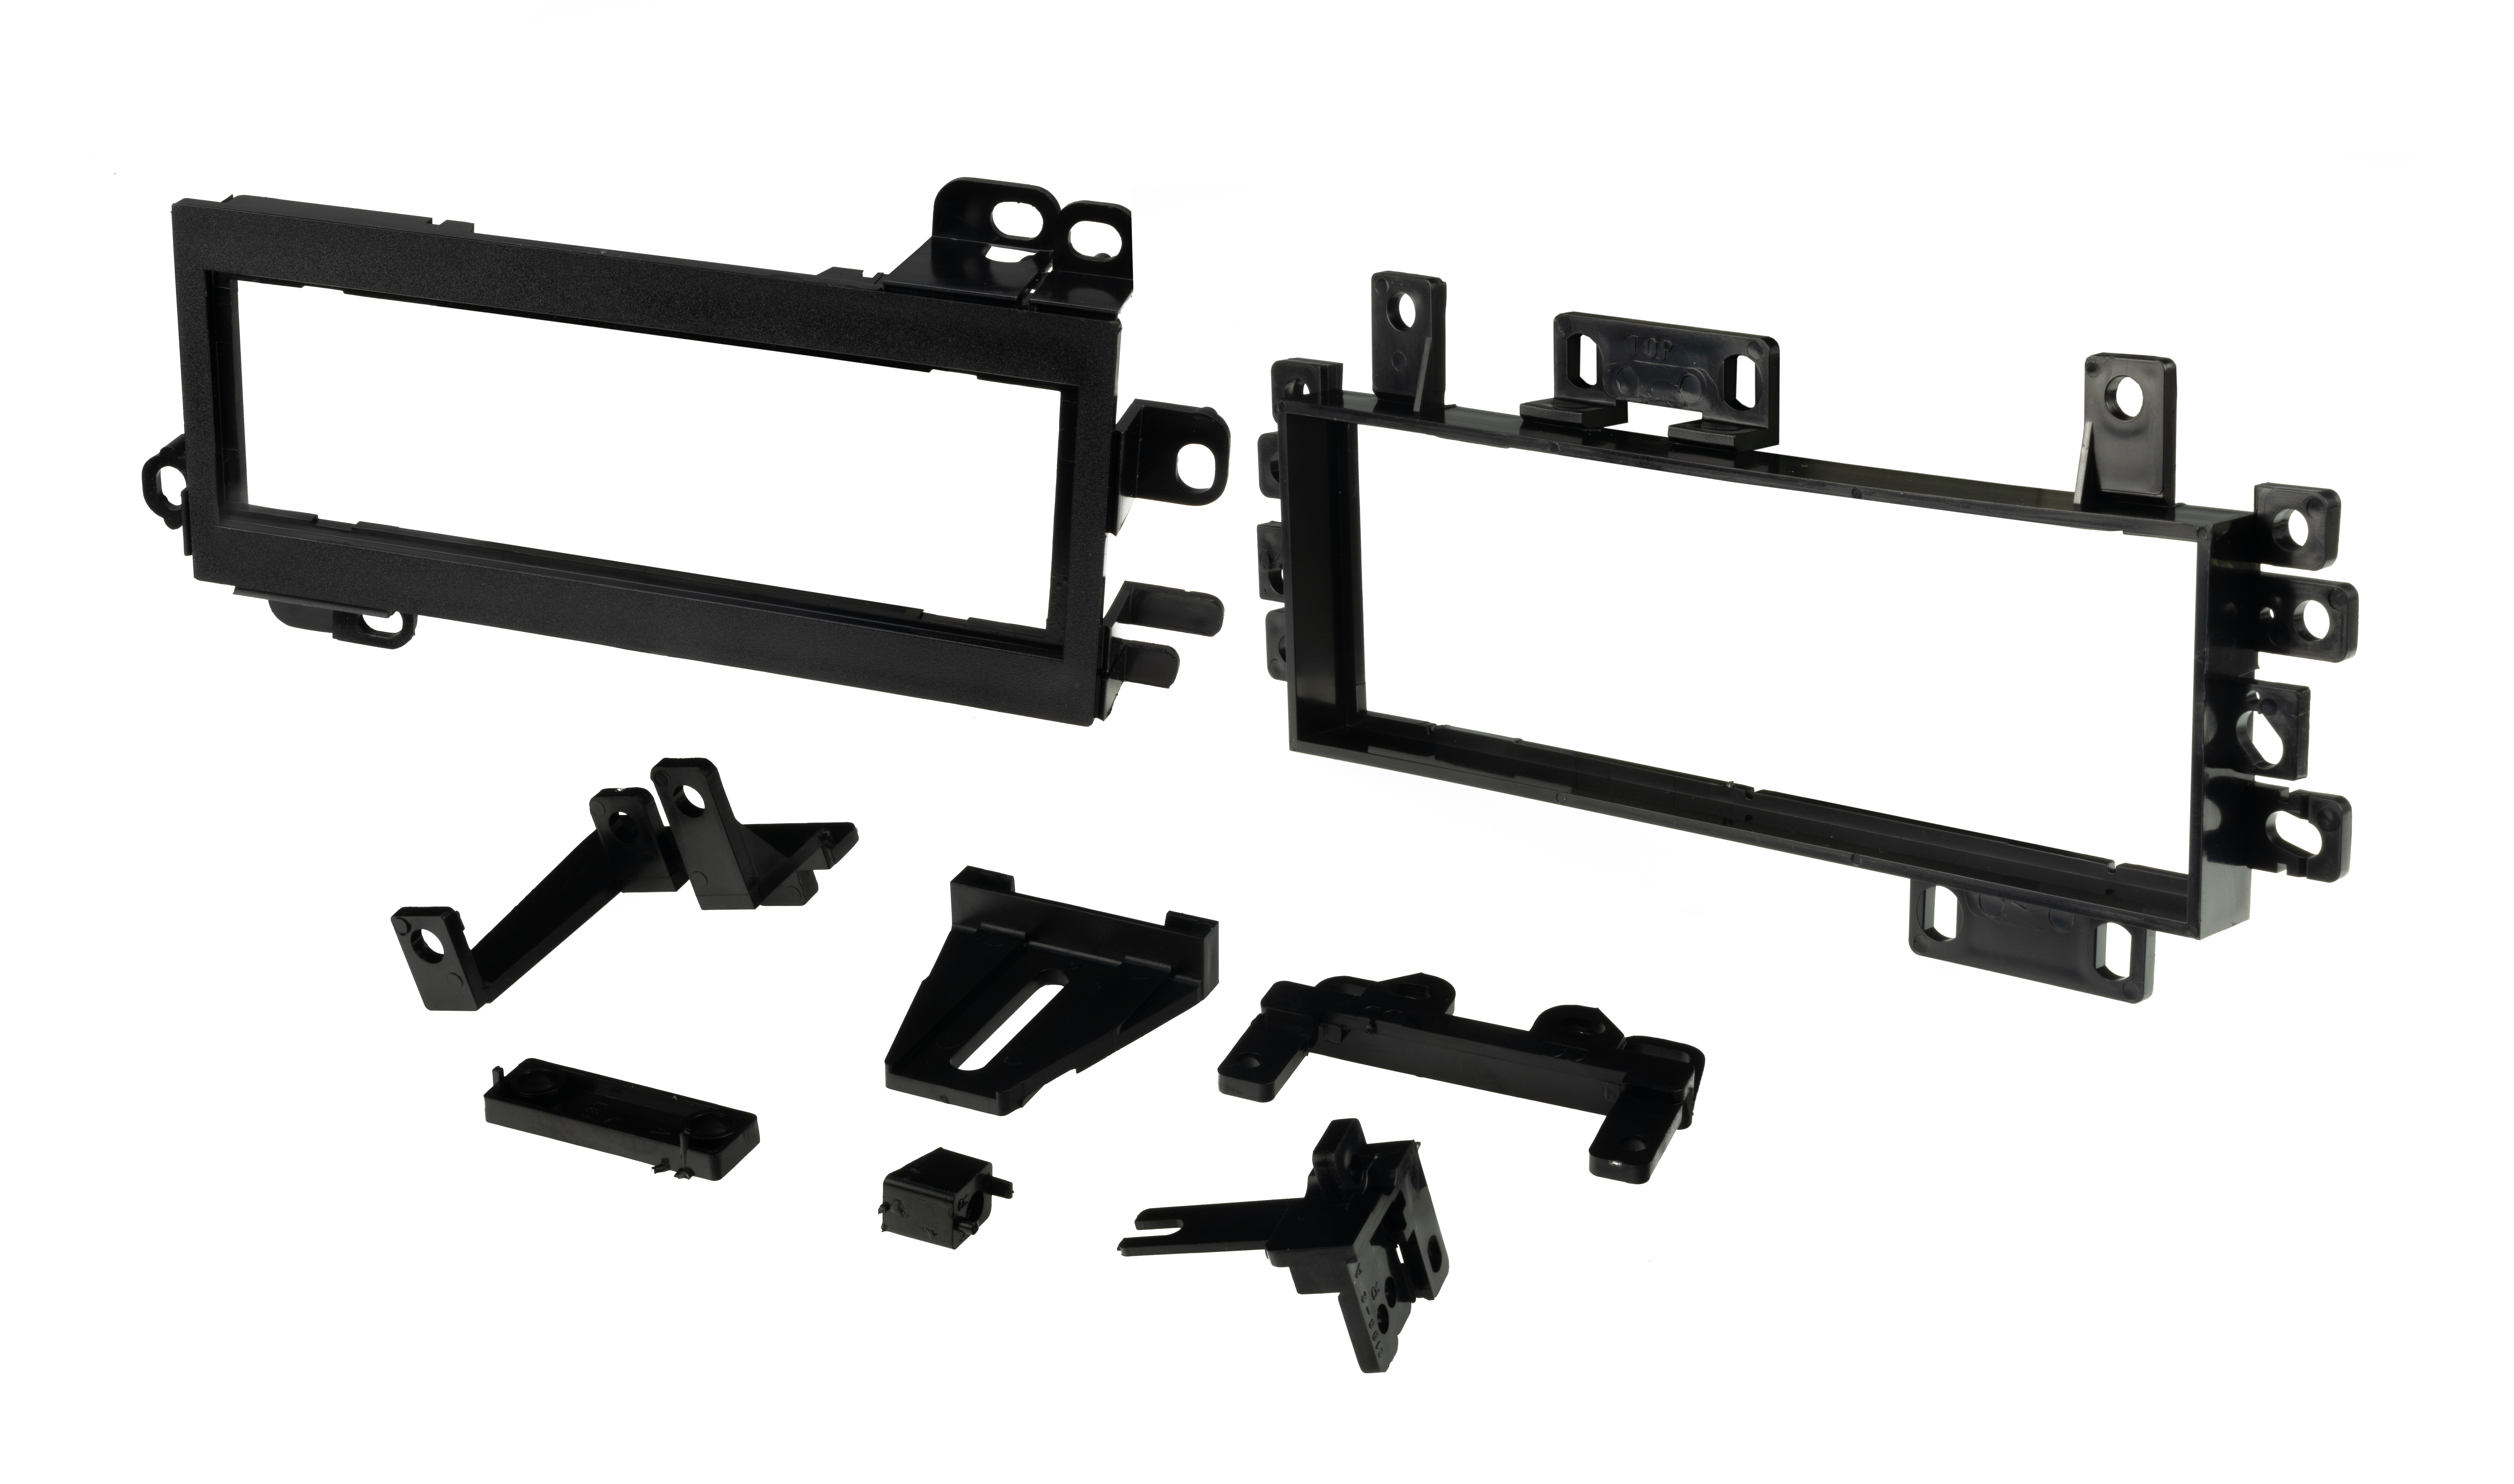 Scosche FCJ2076-WM1 Single DIN Stereo in-Dash Install Kit Comp w/ 1974-01 Ford/Chrysler/Jeep Black New - image 1 of 12